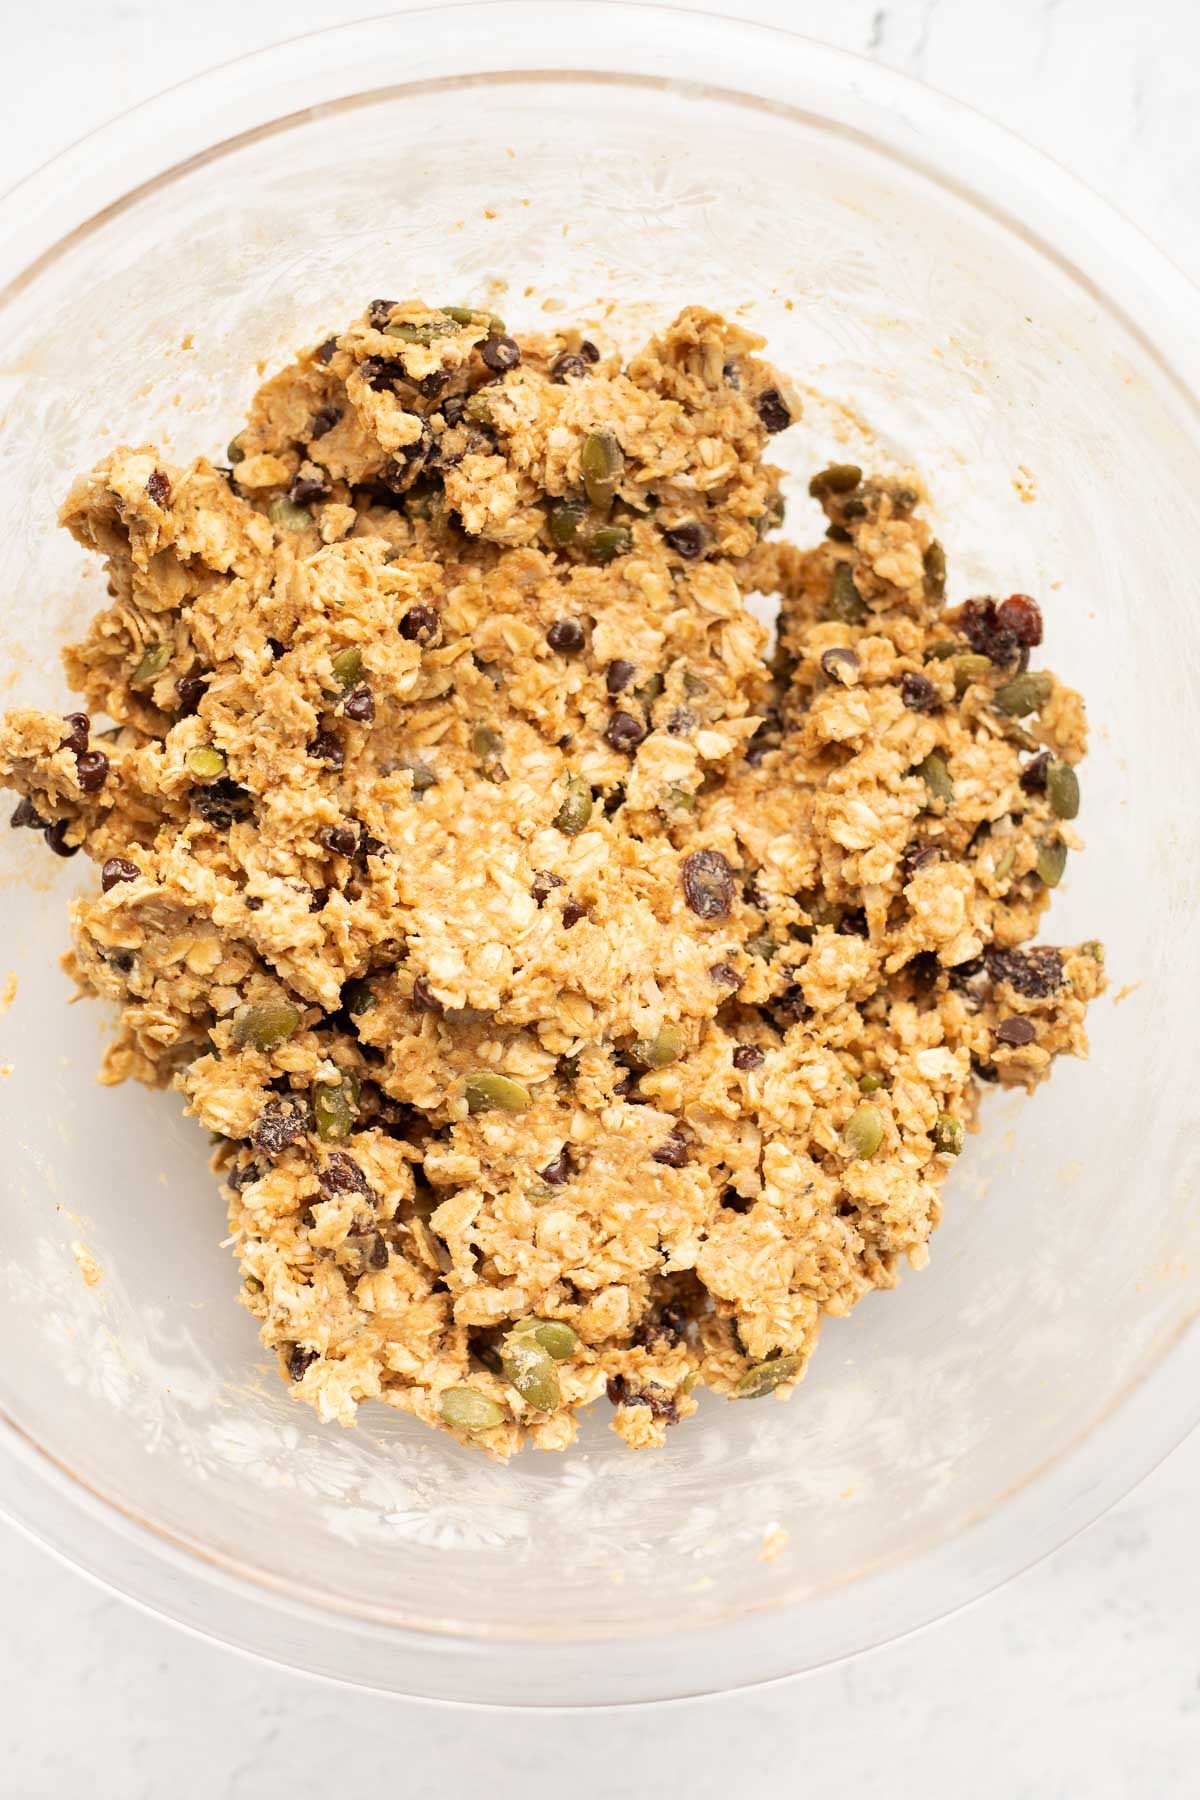 Ingredients for homemade protein bars mixed together in a glass bowl.